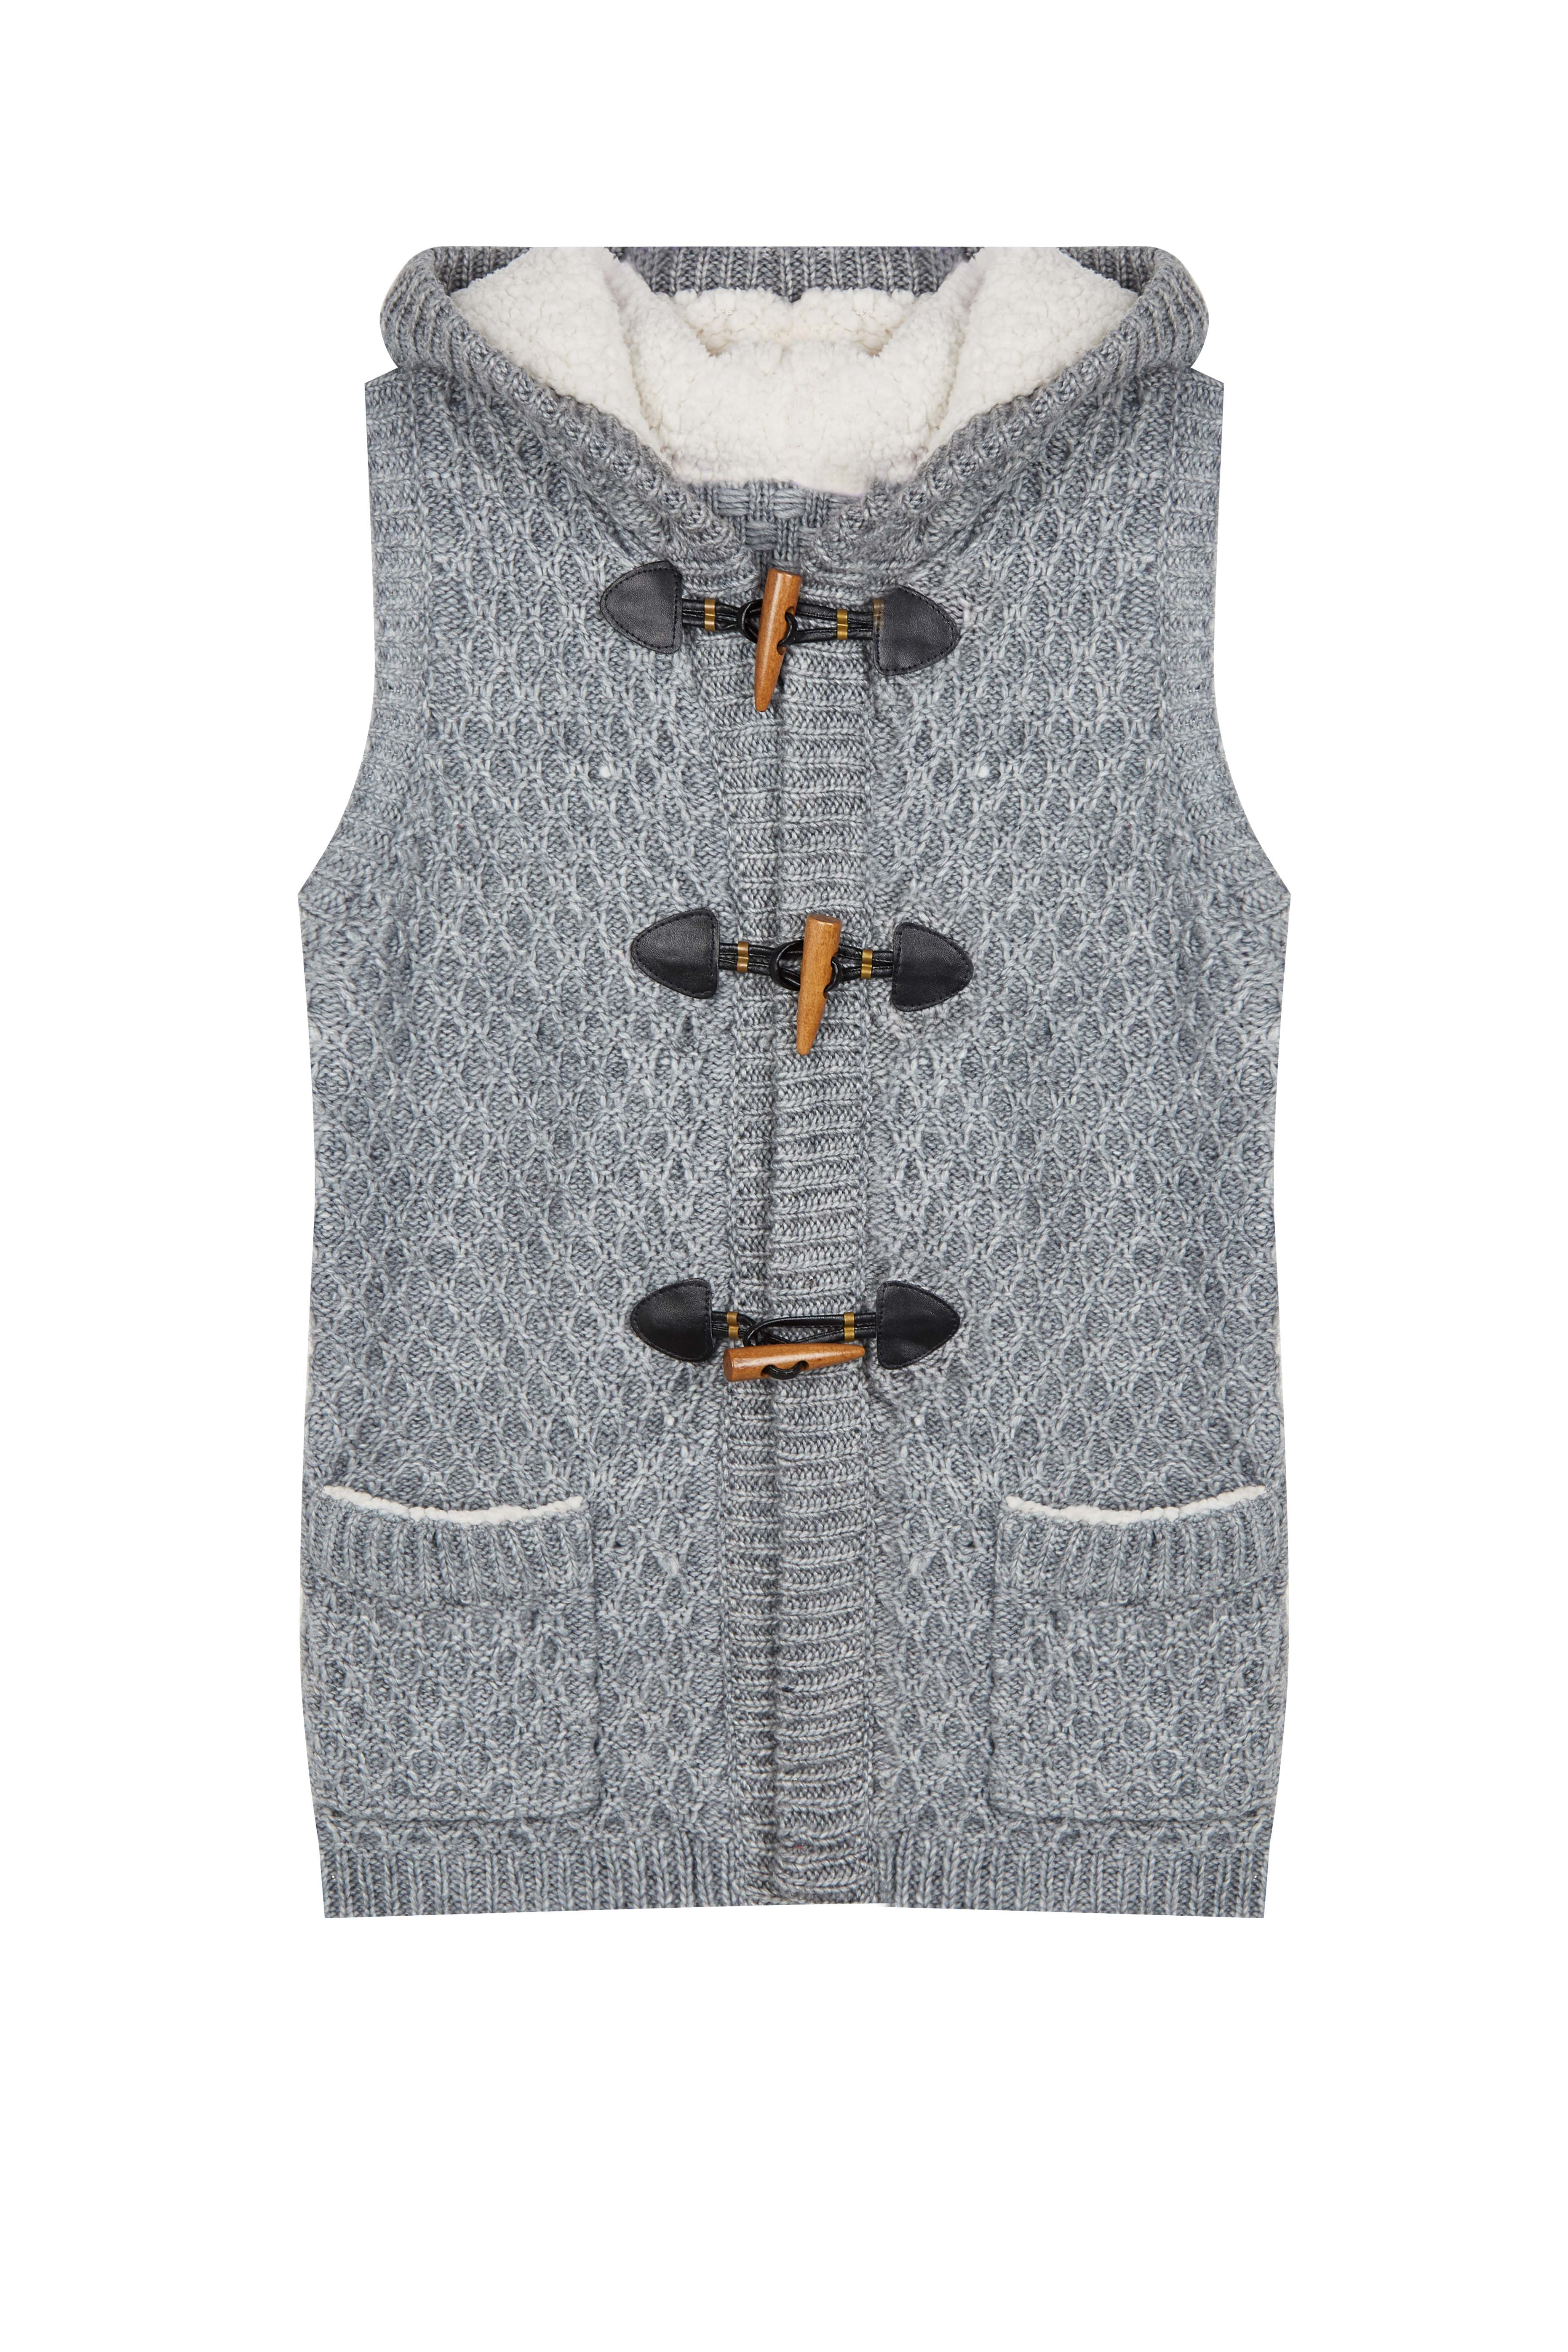 Women's Front Button Hooded Sweater Outwear Pattern Knit Vest Cardigan with Pocket